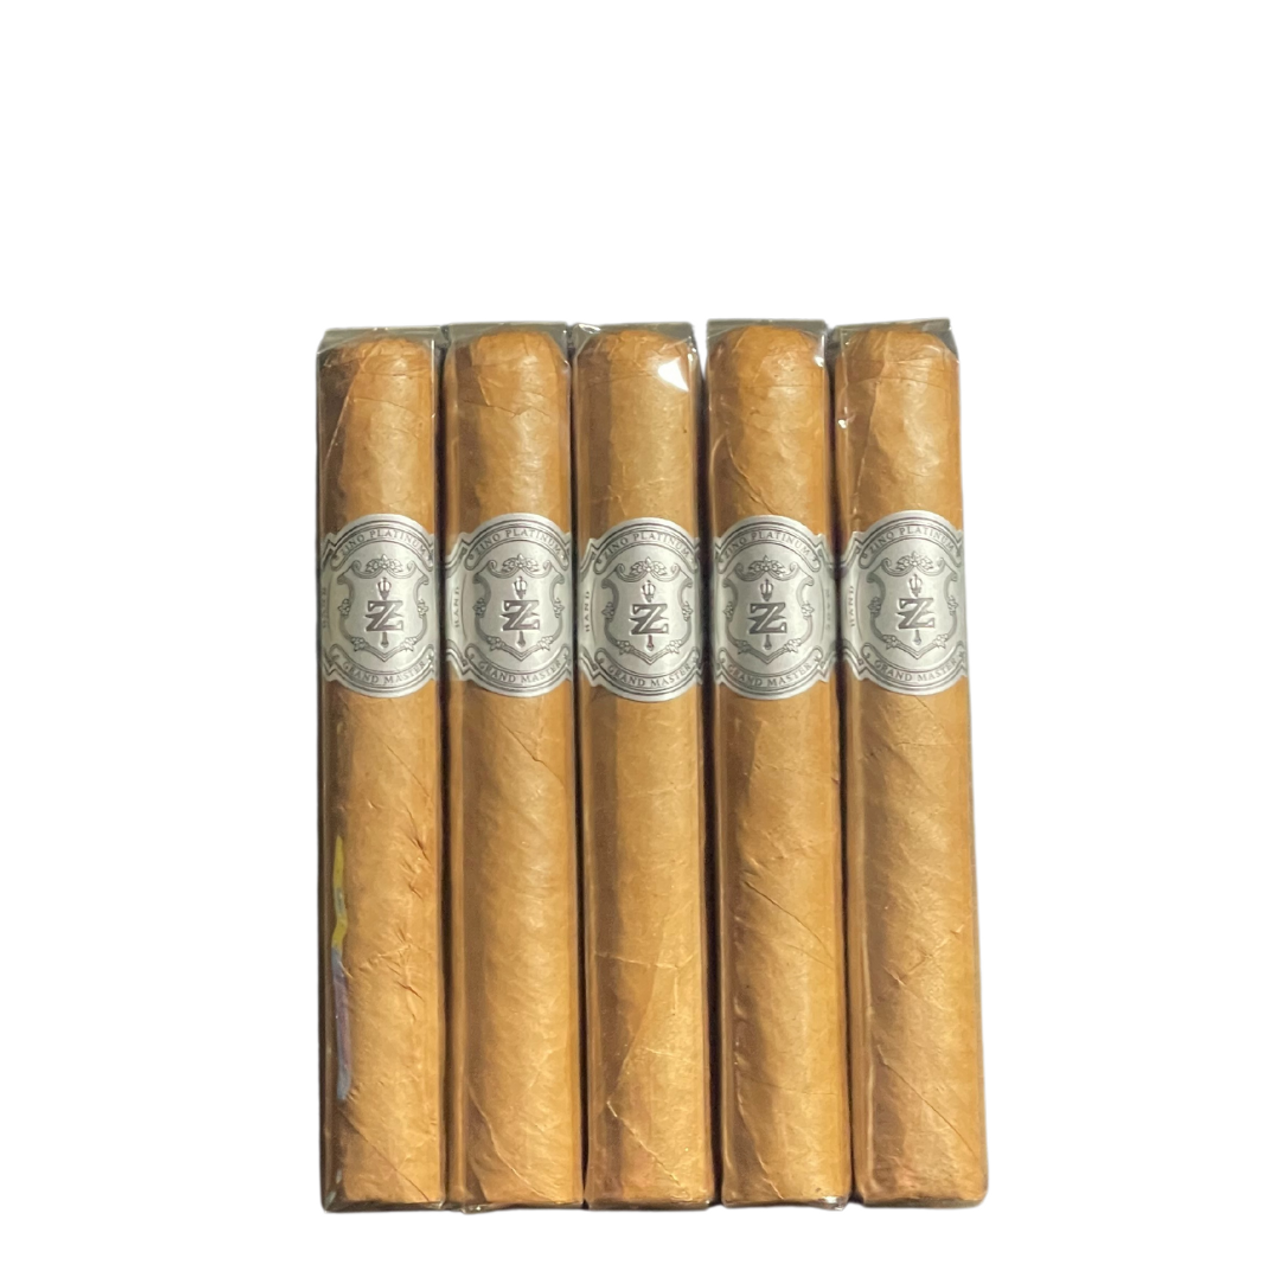 Zino Platinum Scepter Series Grand Master  5 1/2 X 52 ) 5 pack comes with FREE shipping @cigarsamplers.com